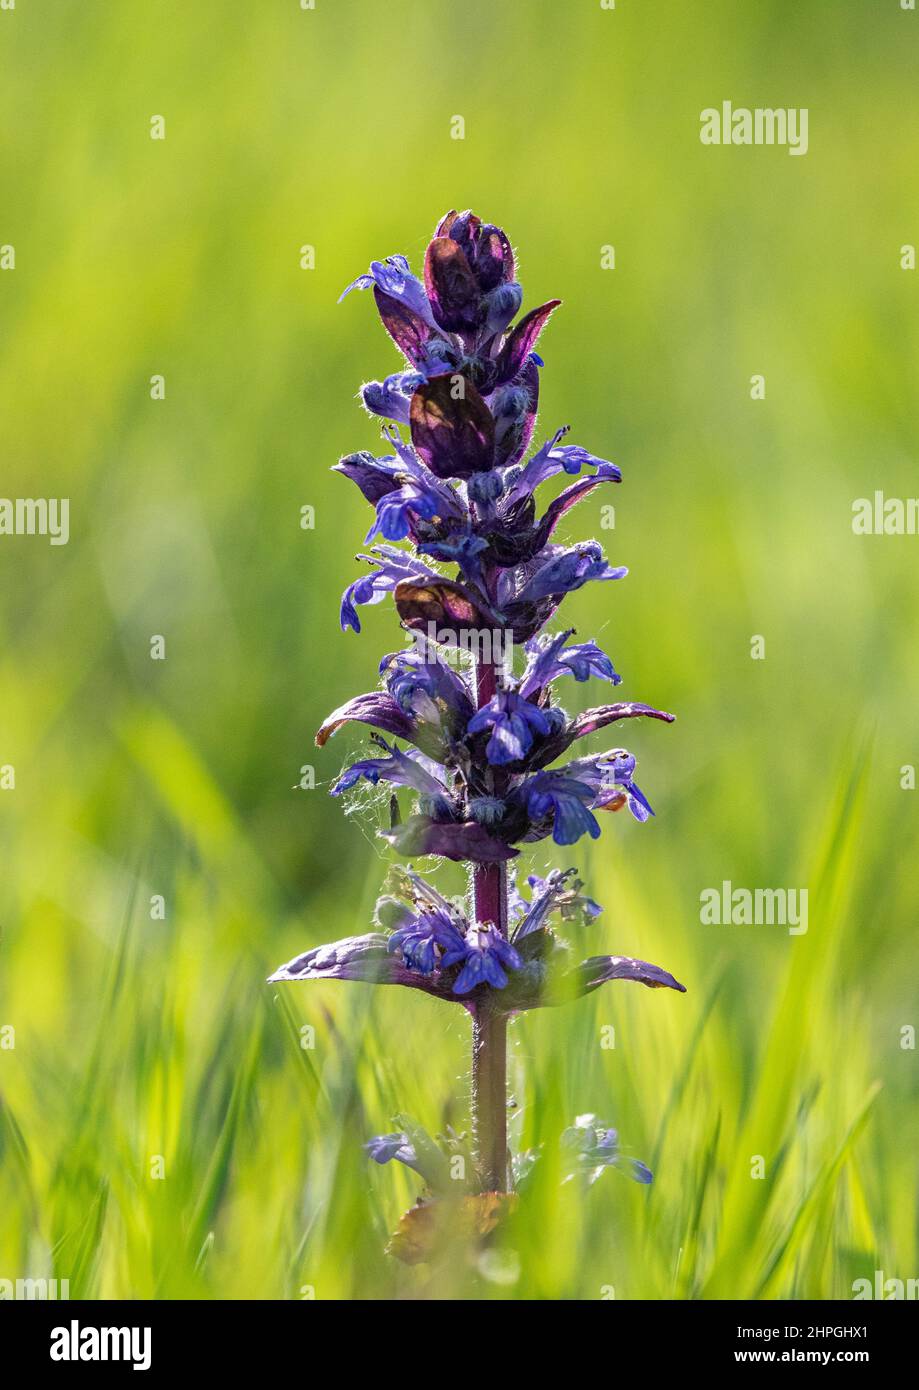 A macro shot of a single flower stem of Bugle, Ajuga reptans. It shows the details of the flower  against a clean natural green background. Suffolk.UK Stock Photo